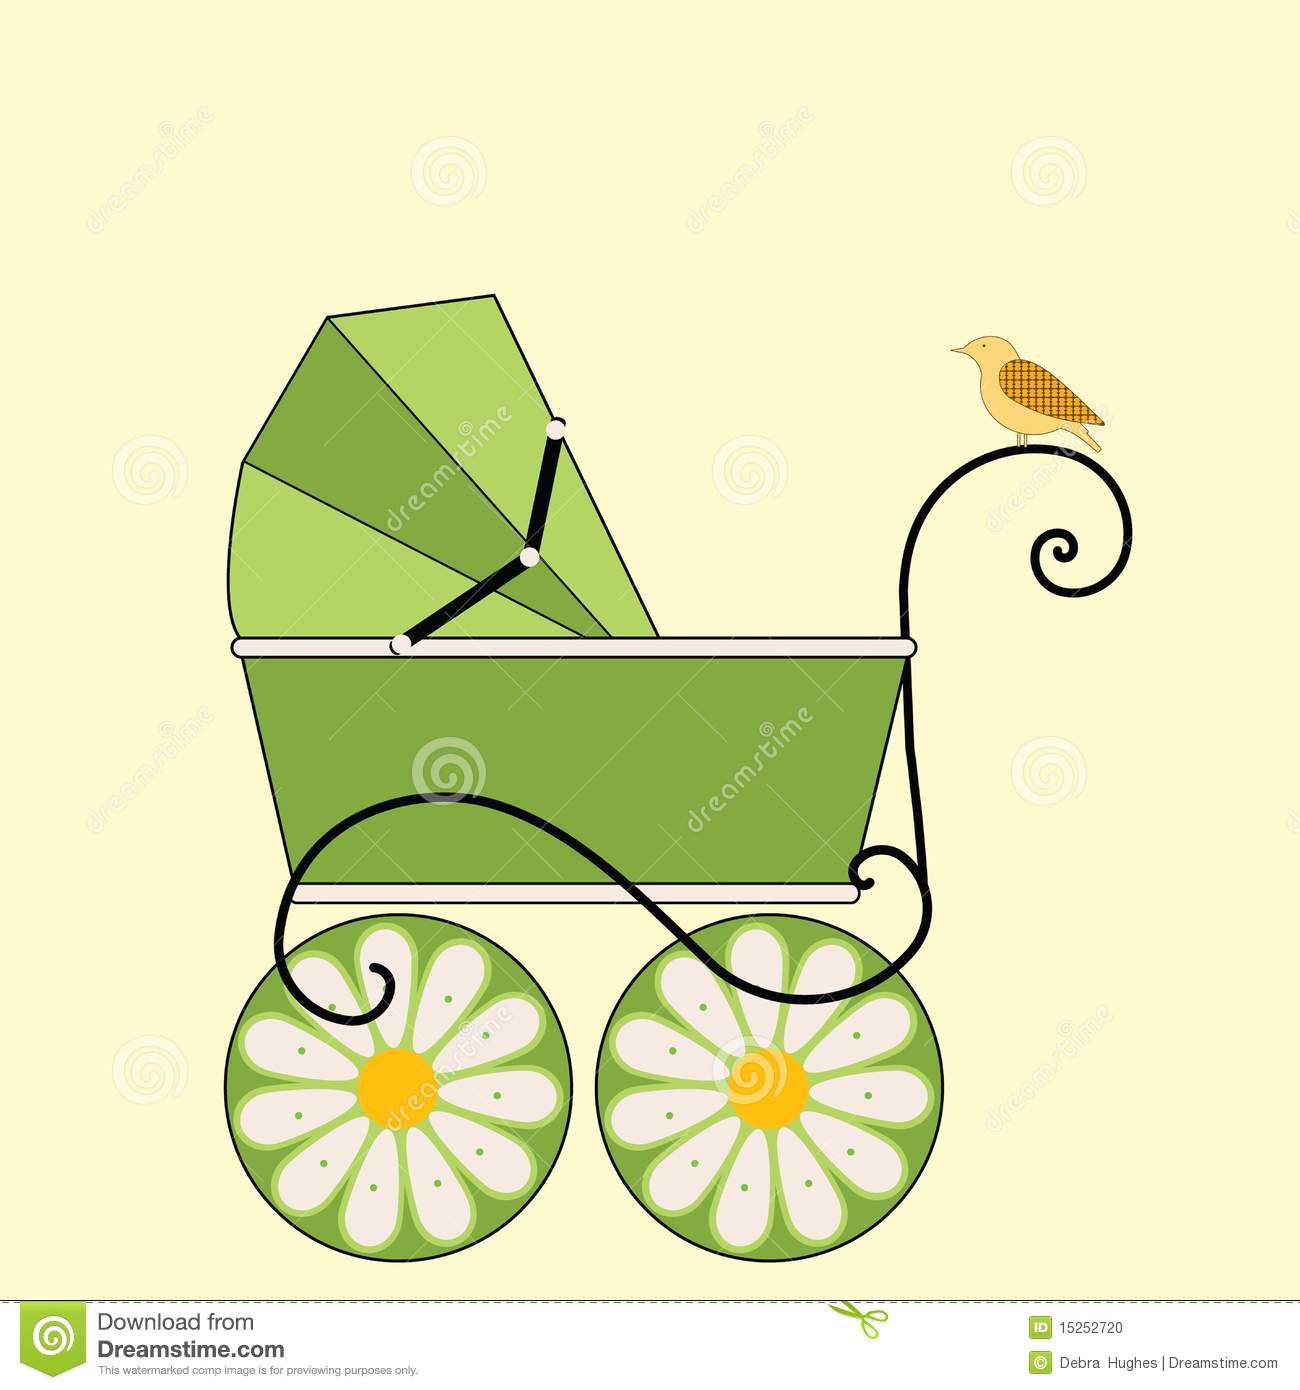 Baby Carriage   Pram And Bird Gender Netural Colors  Pattern On Birds    